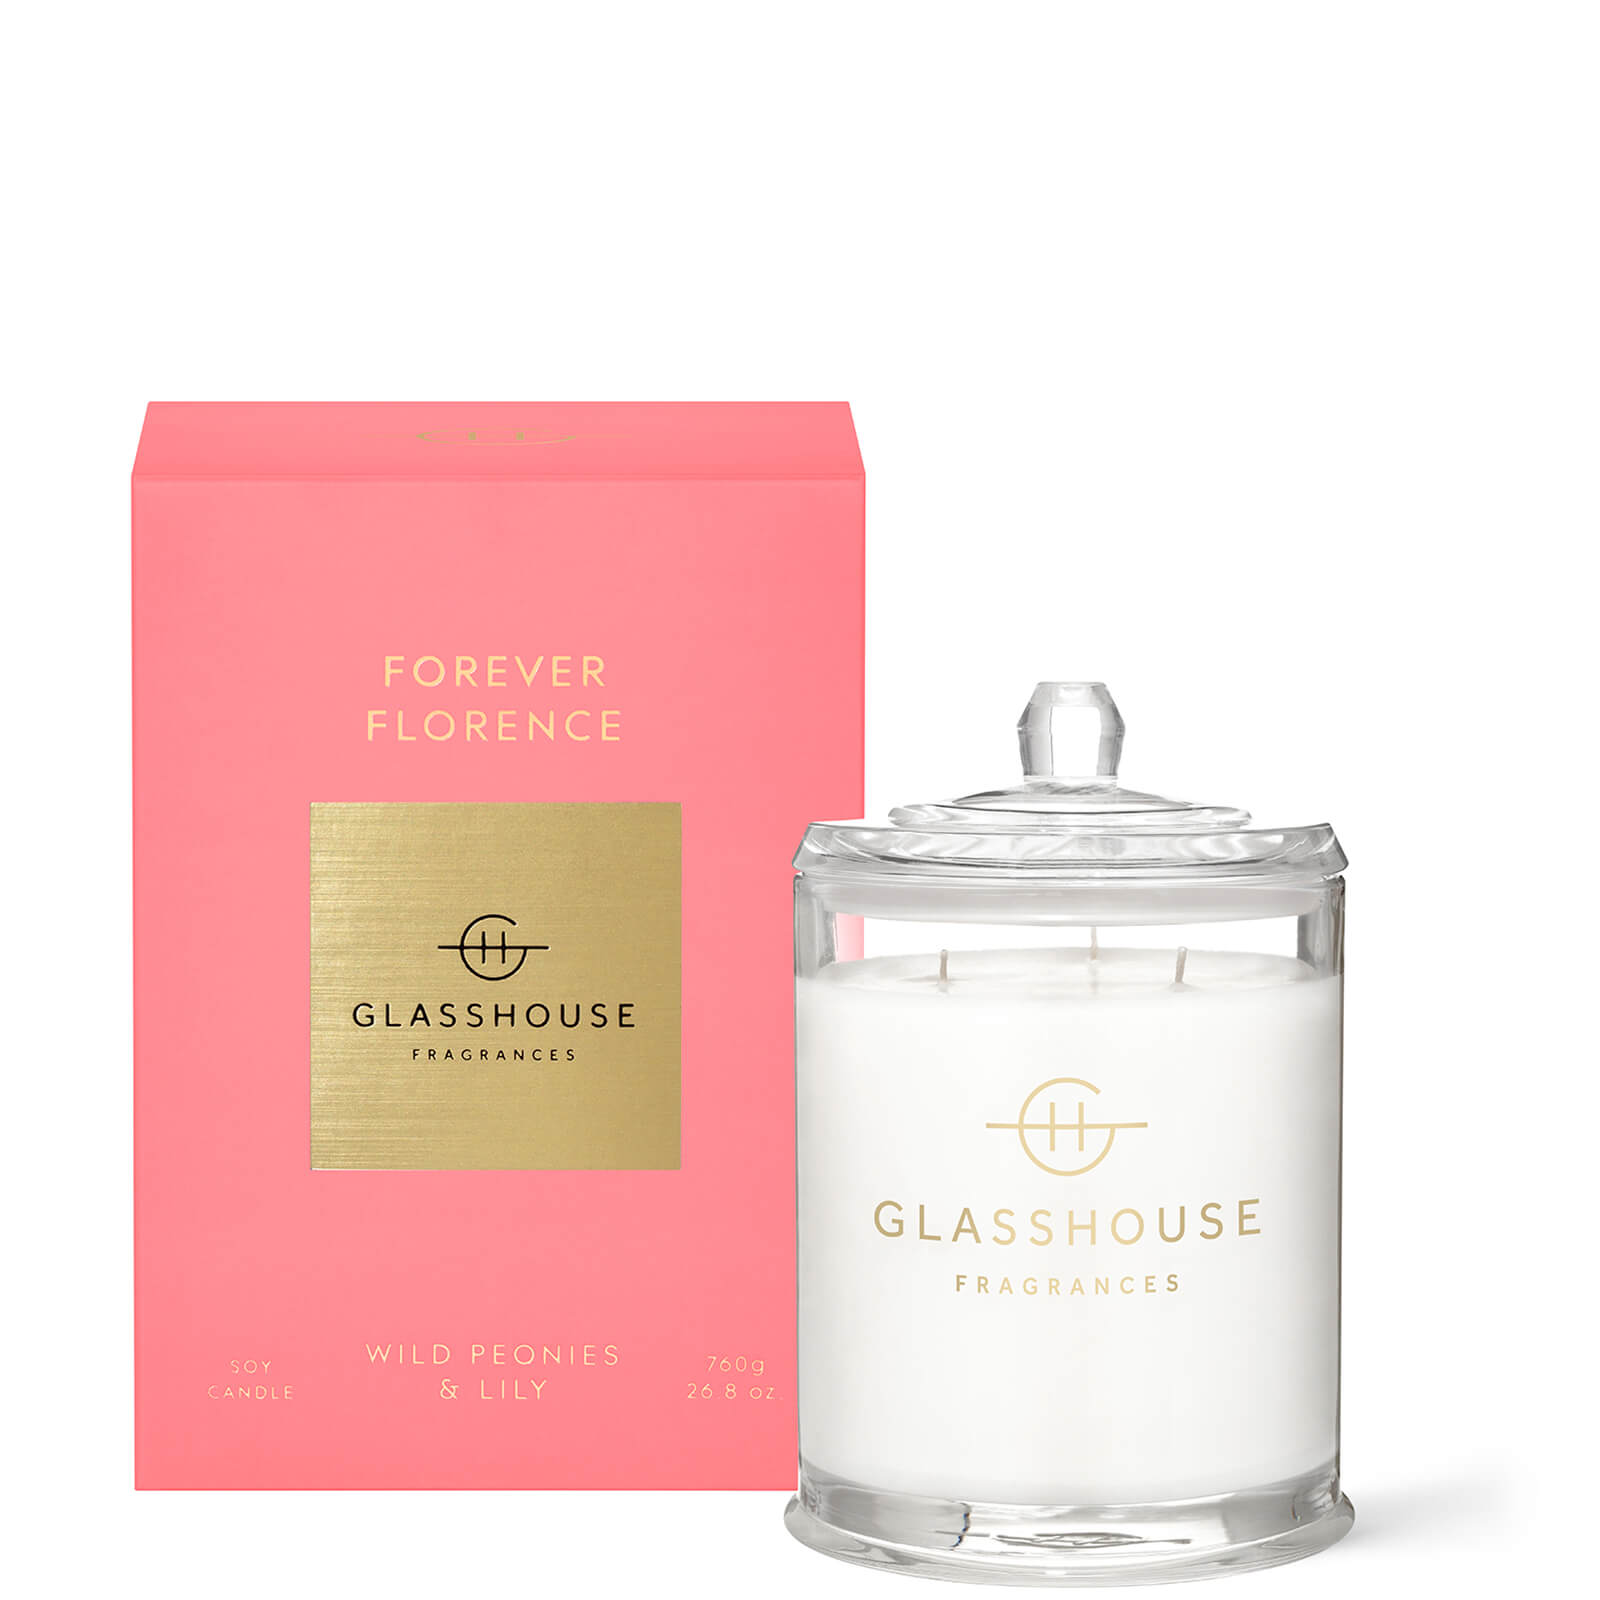 Glasshouse Fragrances Forever Florence Candle 760g In Pink